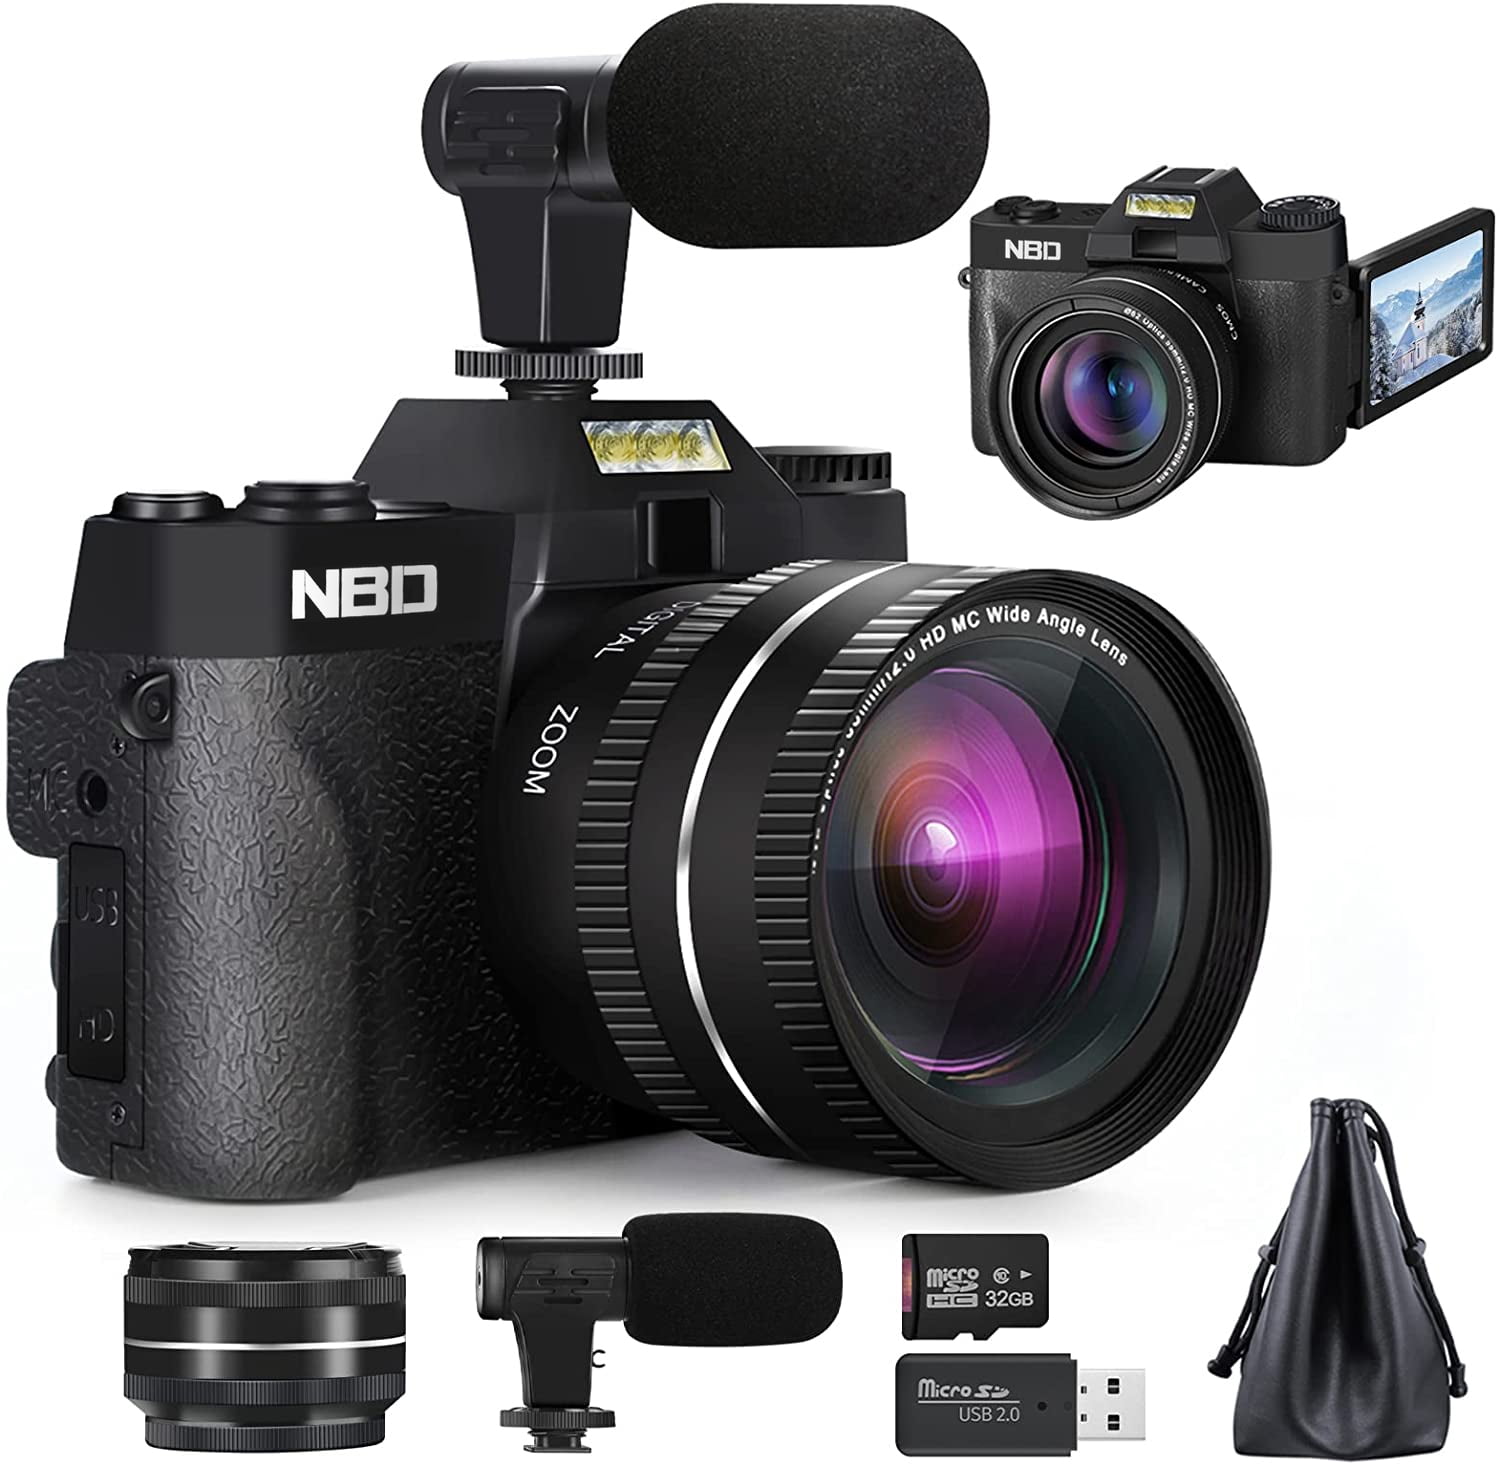 Digital Camera, 4K Video NBD Cameras for Photography for YouTube with WiFi, 3.0/